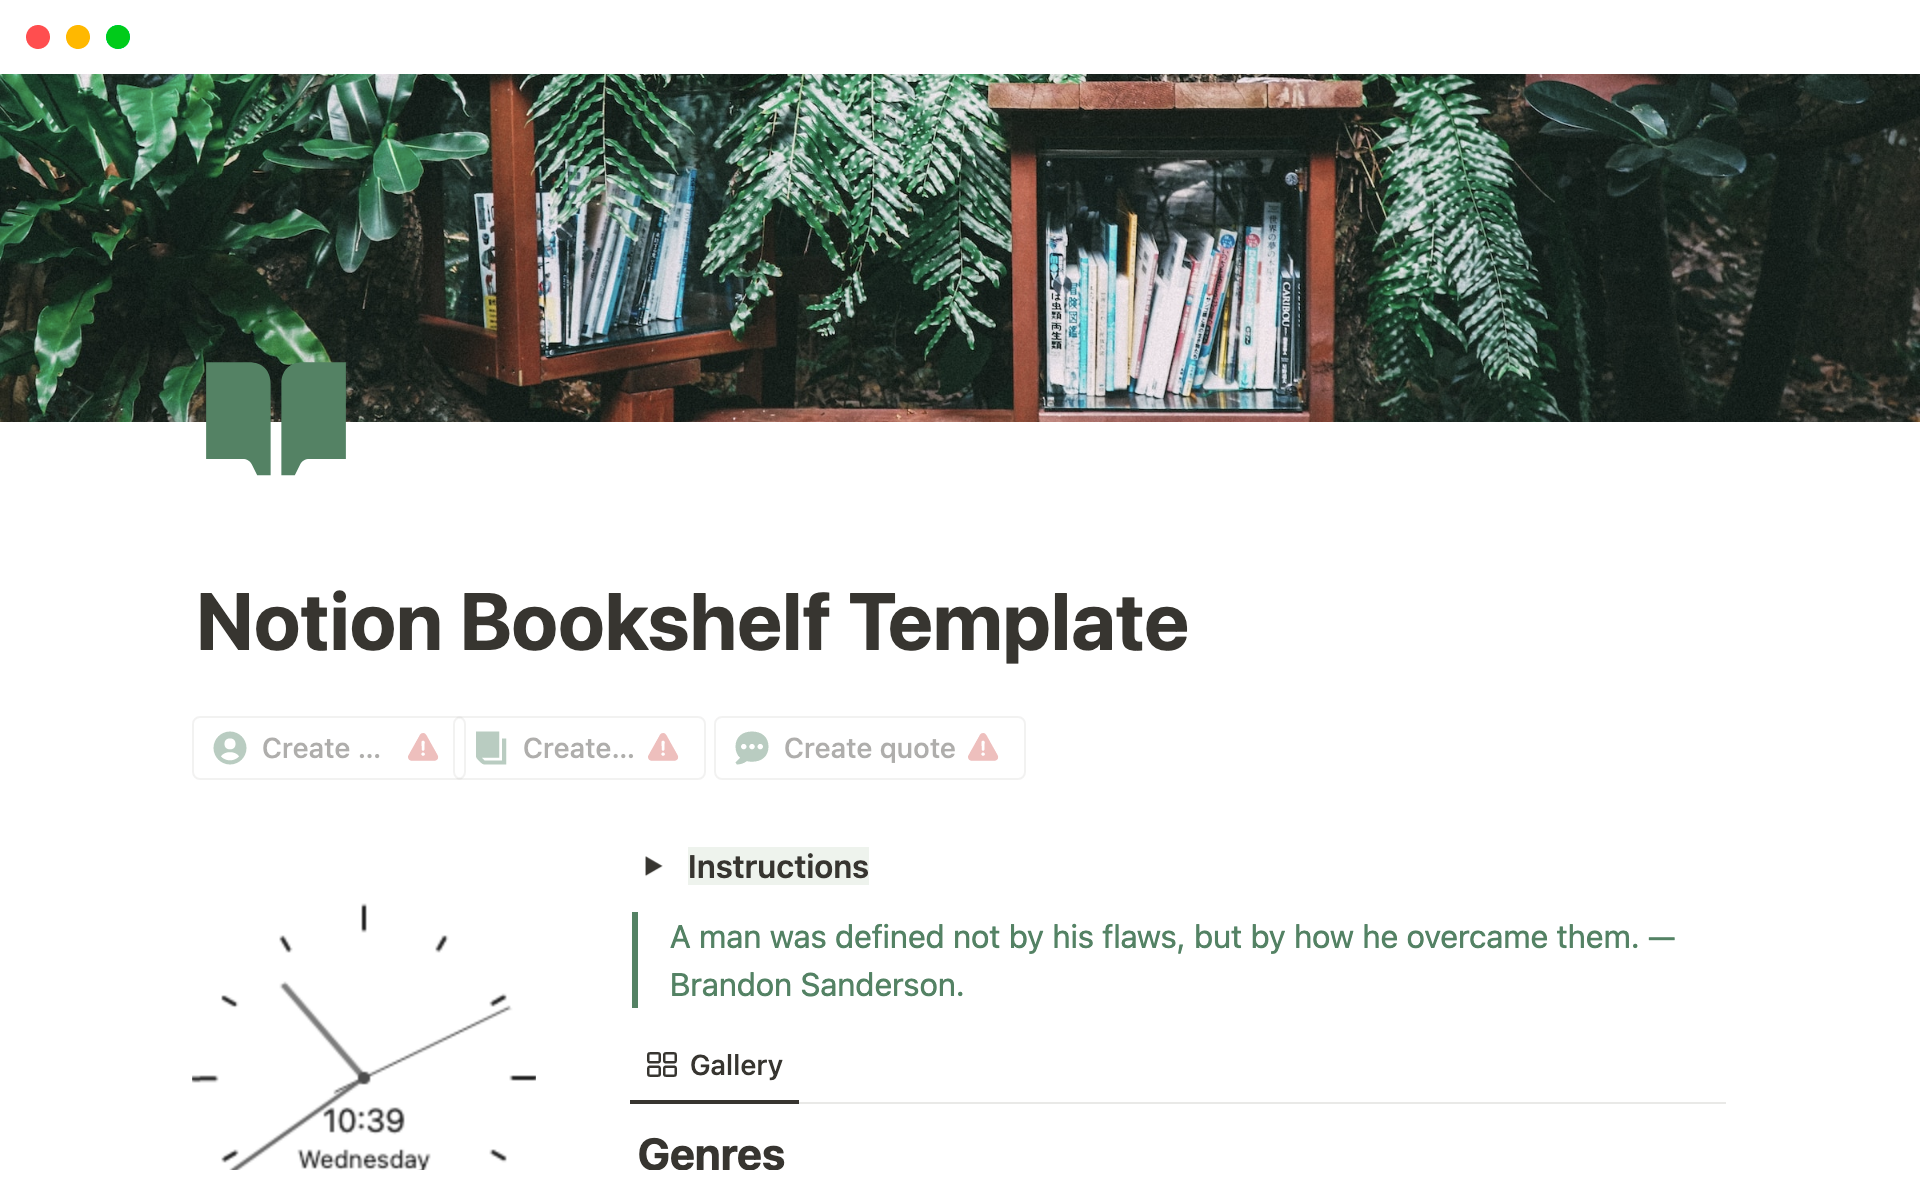 A template preview for Bookshelf